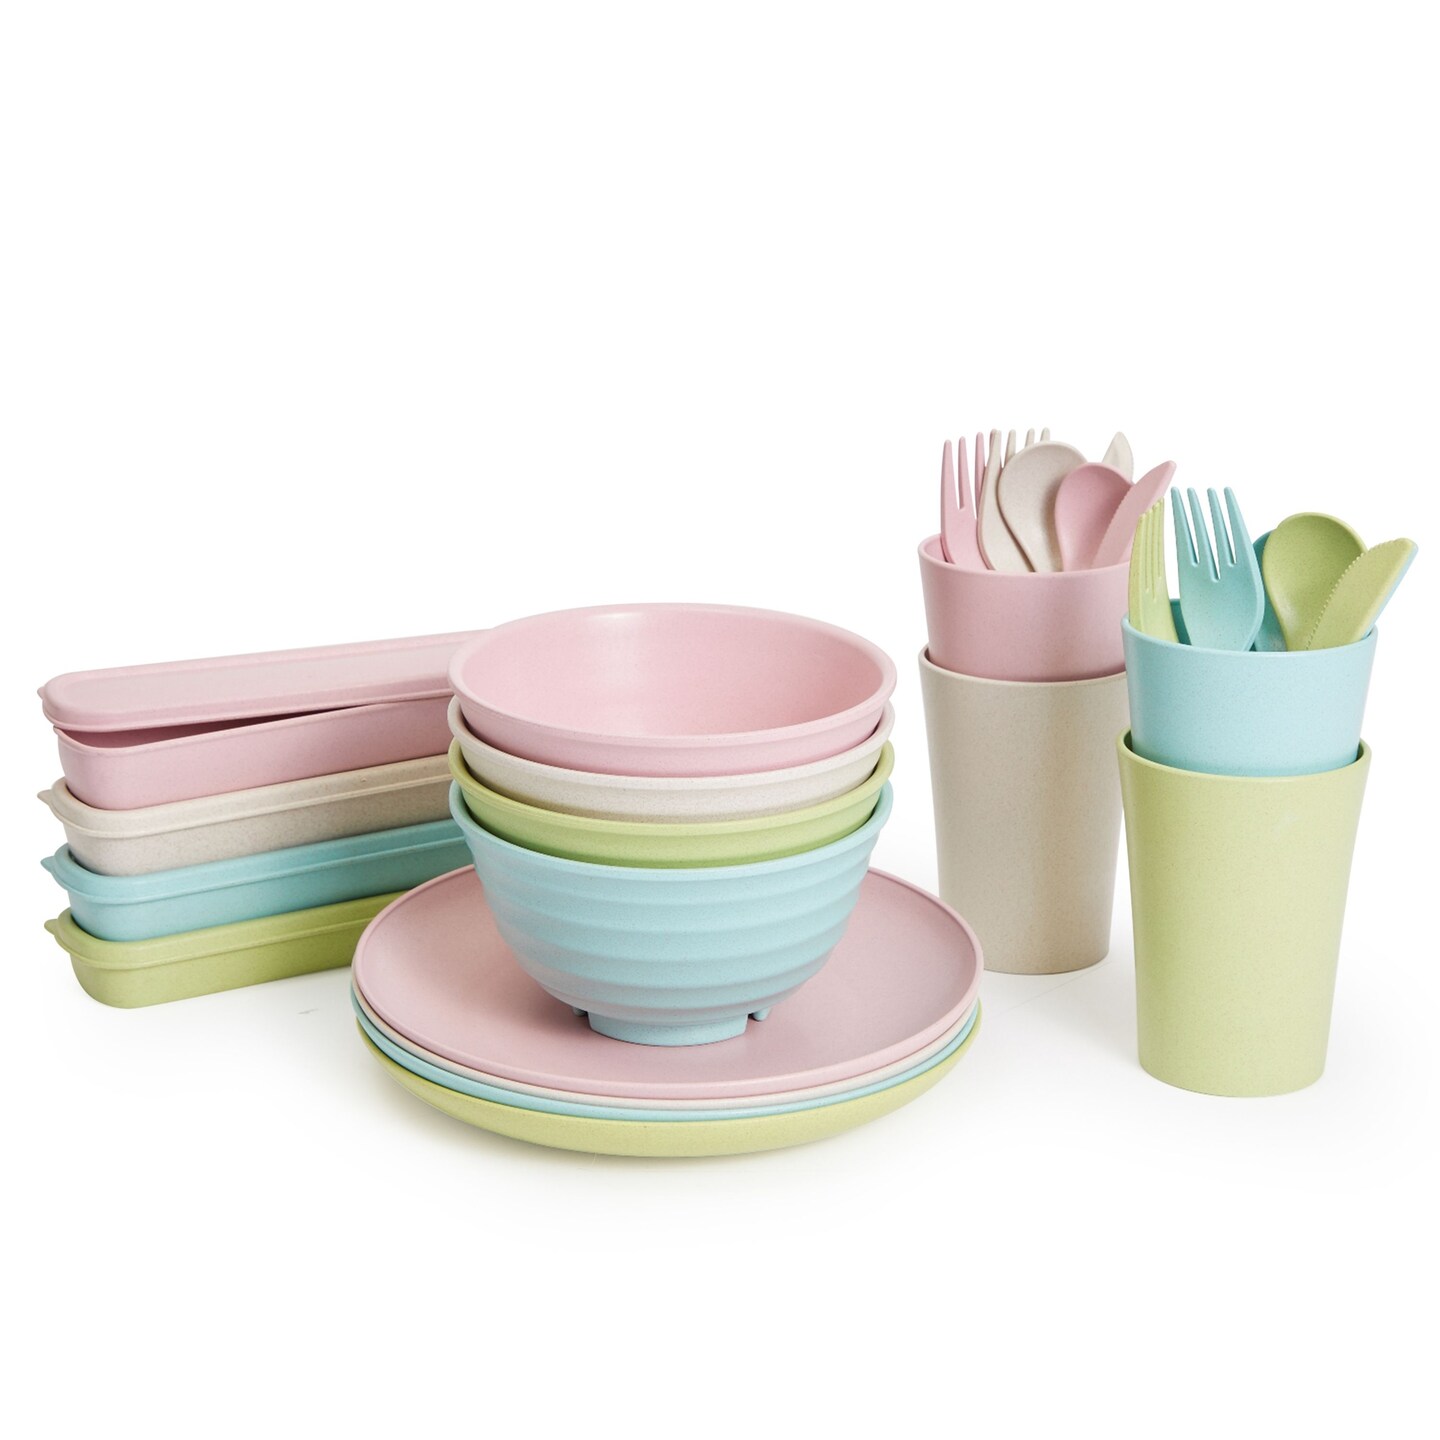 Set of 28 Pcs Wheat Straw Dinnerware with Cups, Plates, Bowls for Kids &#x26; Kitchen, Unbreakable &#x26; Microwave Safe, 4 Colors